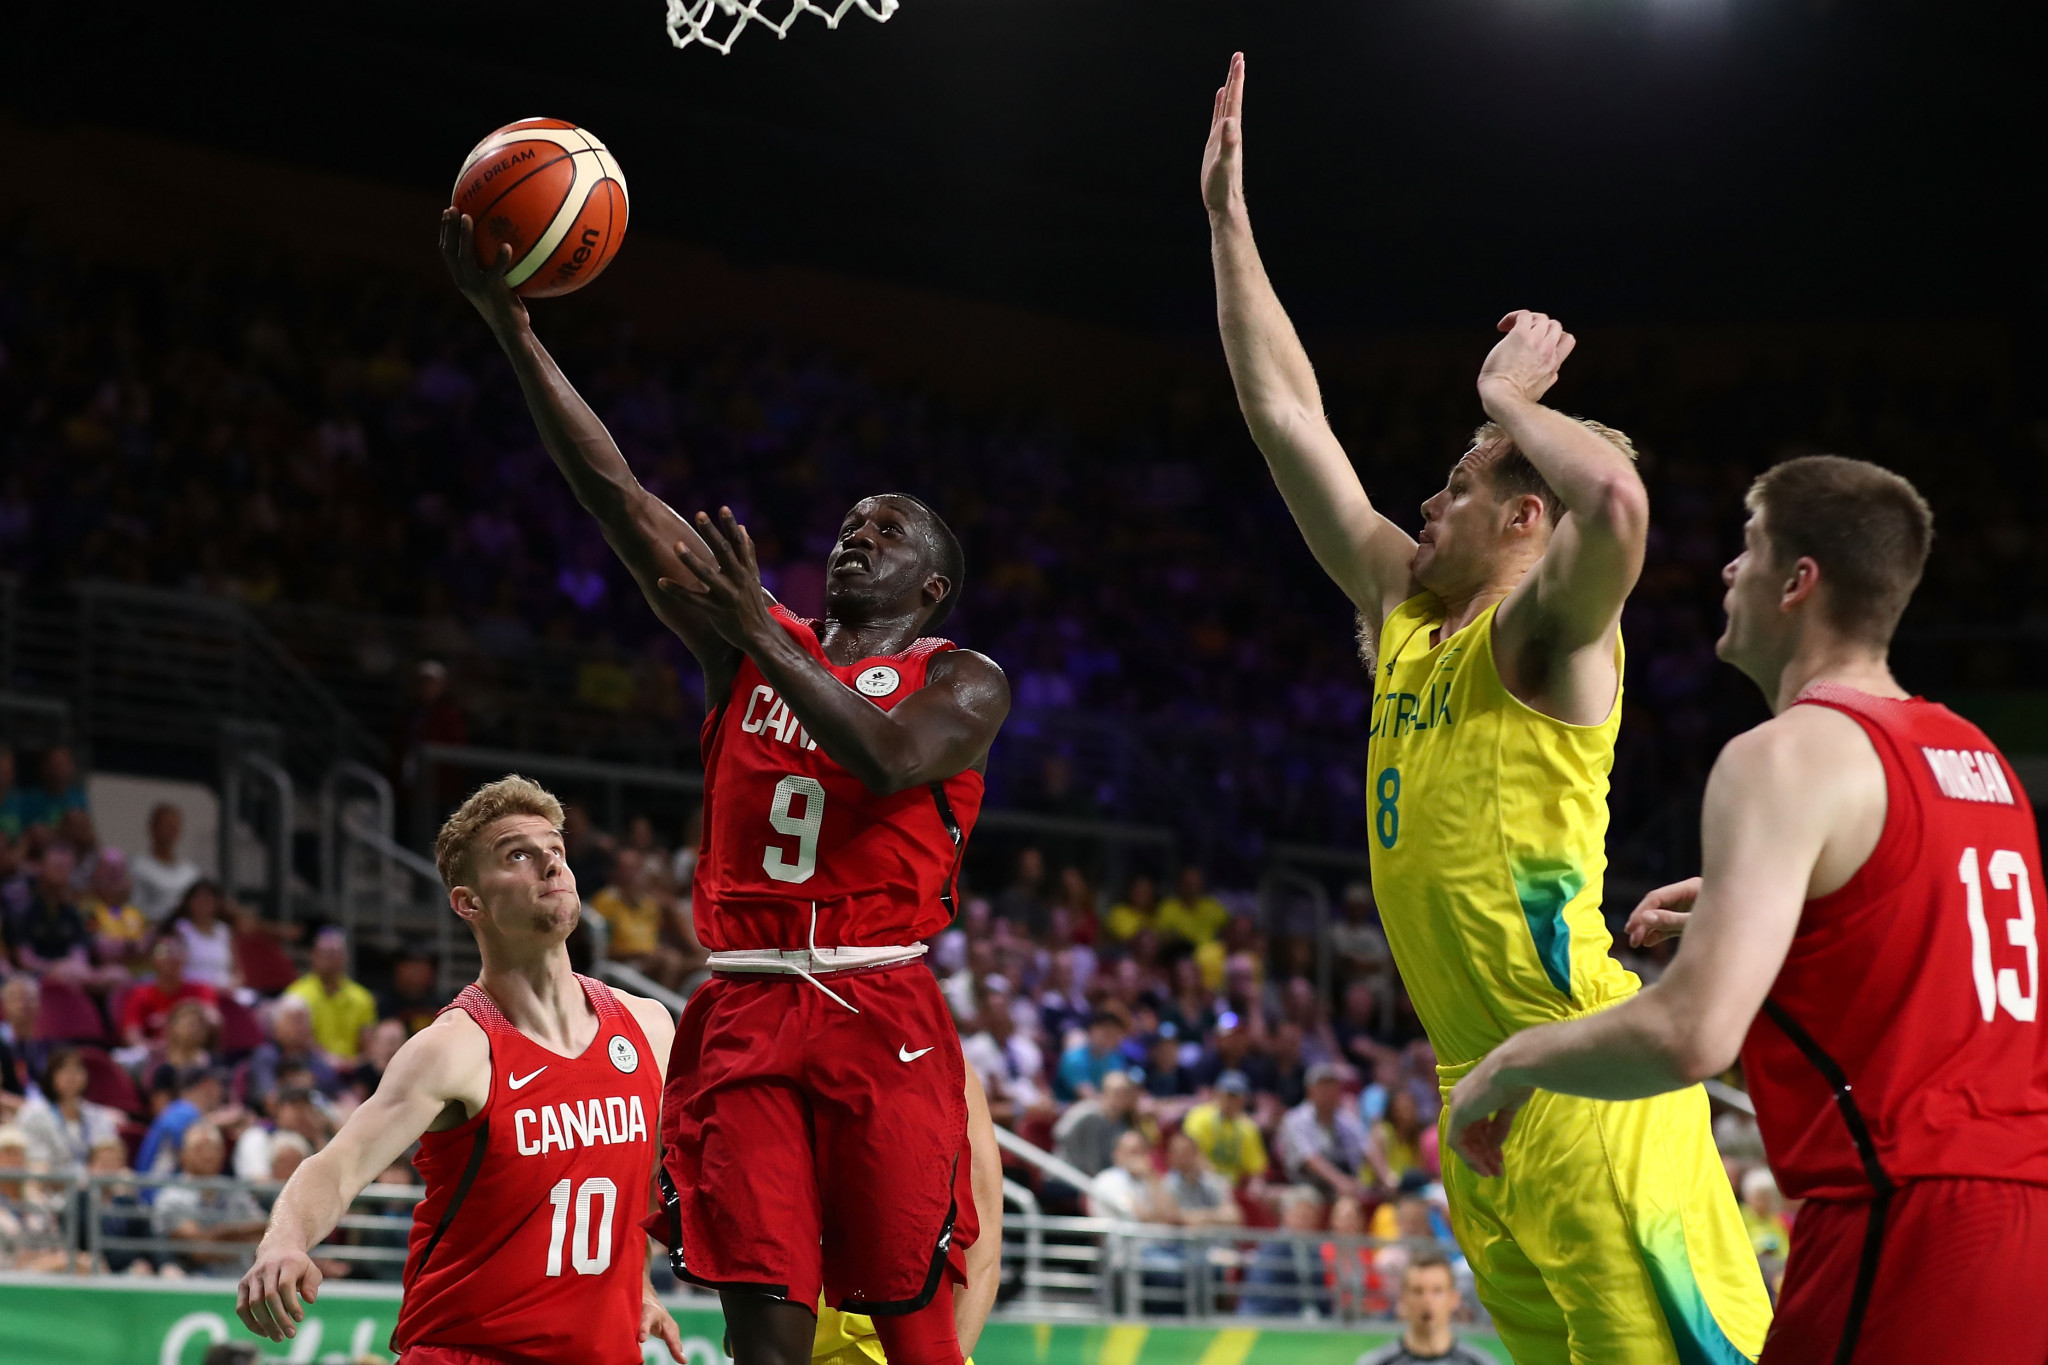 Organisers request for fans at Olympic basketball qualifiers in Canada